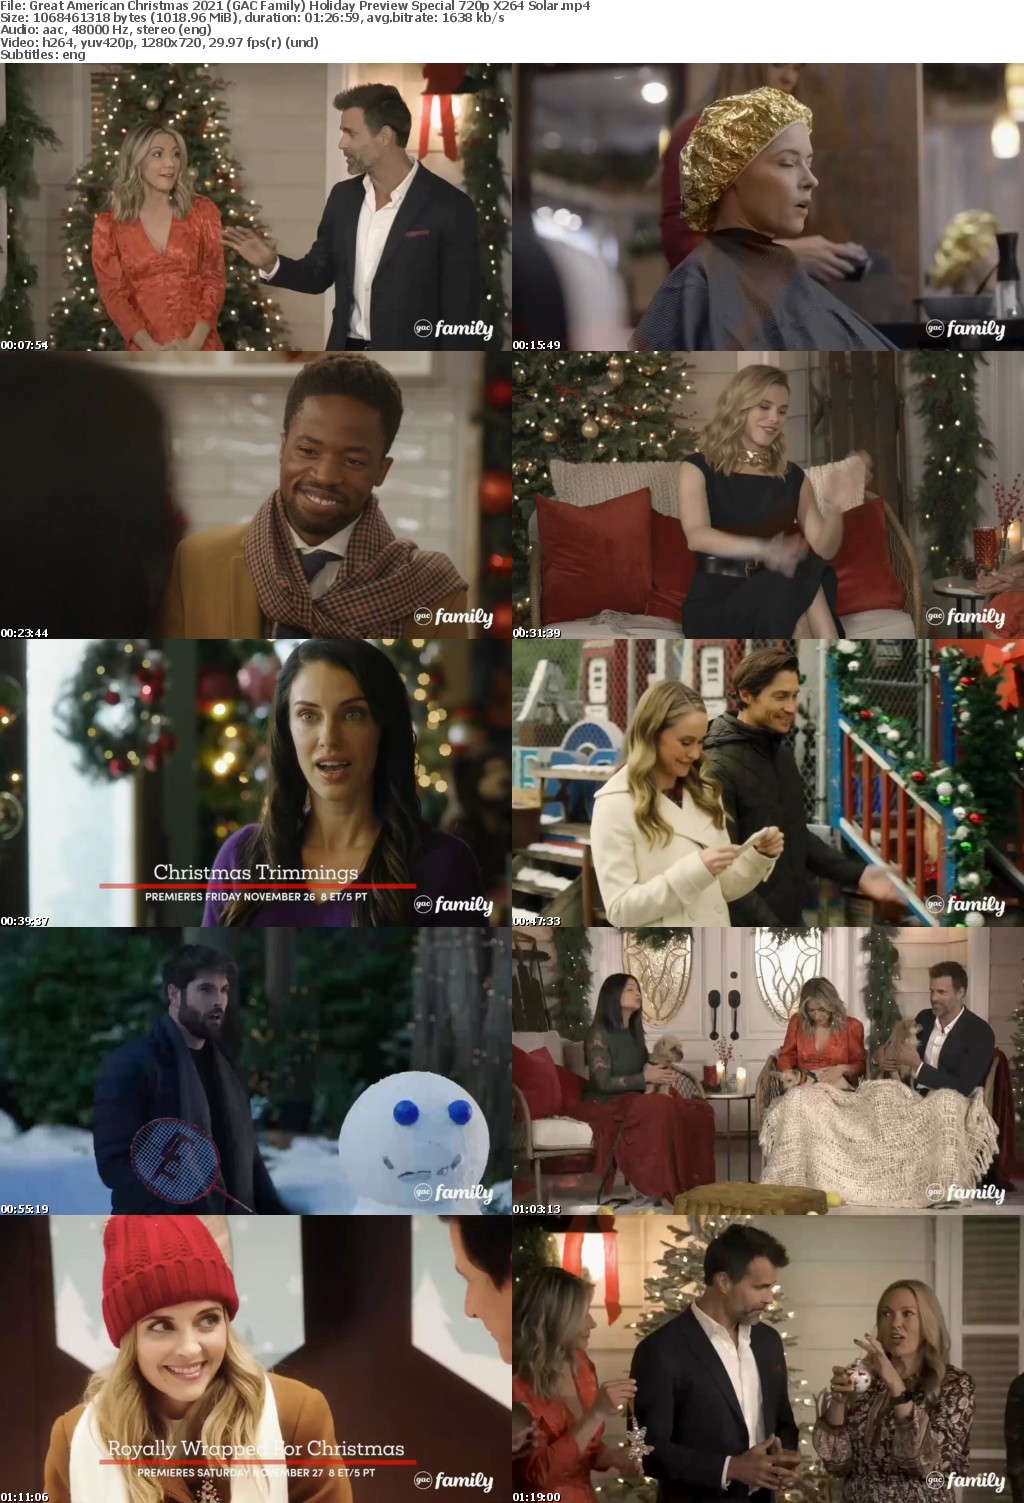 Great American Christmas 2021 (GAC Family) Holiday Preview Special 720p X264 Solar